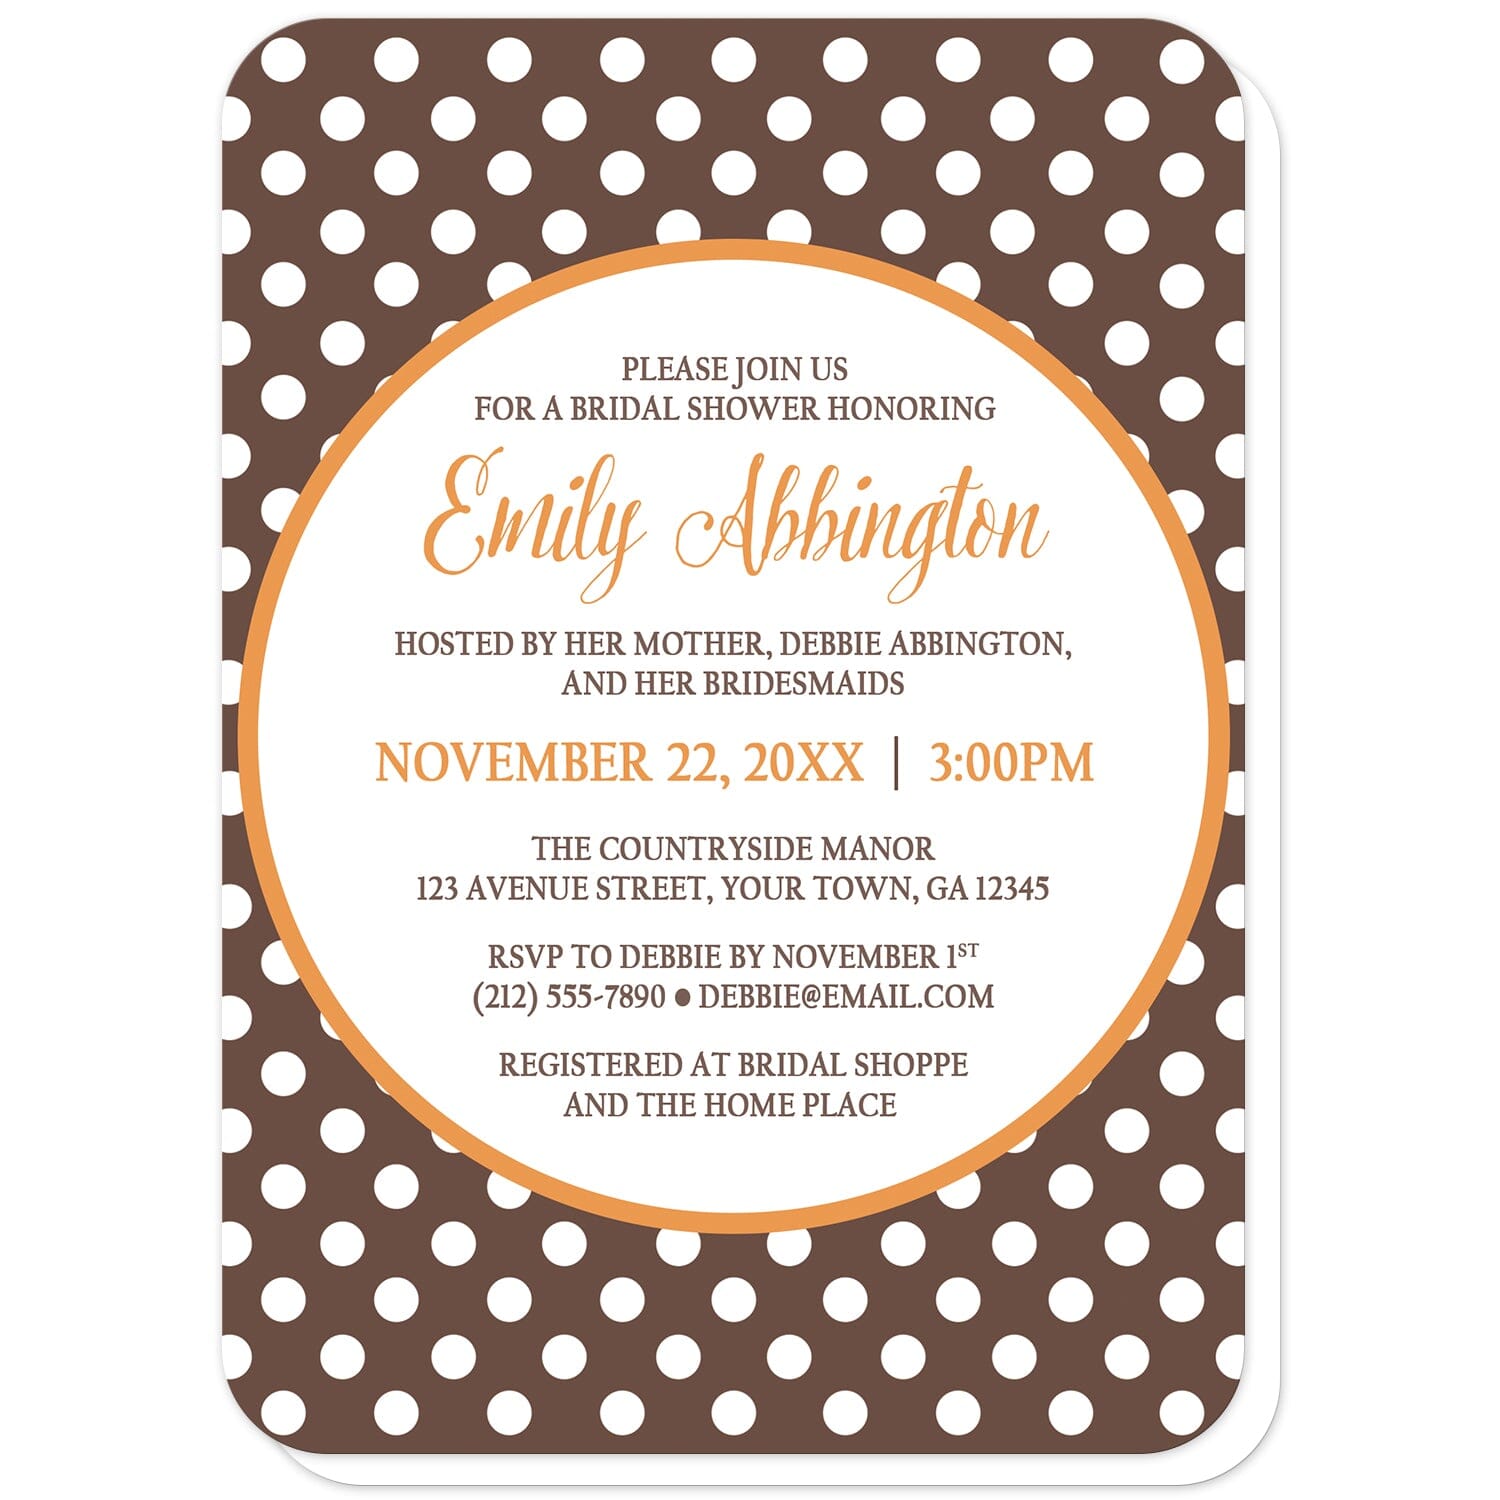 Orange Brown Polka Dot Bridal Shower Invitations (with rounded corners) at Artistically Invited. Autumn-inspired orange brown polka dot bridal shower invitations with your bridal shower celebration details custom printed in orange and brown inside a white circle outlined in orange, over a brown polka dot pattern. The bride-to-be's name and shower date are printed in orange while the remaining details are printed in brown.